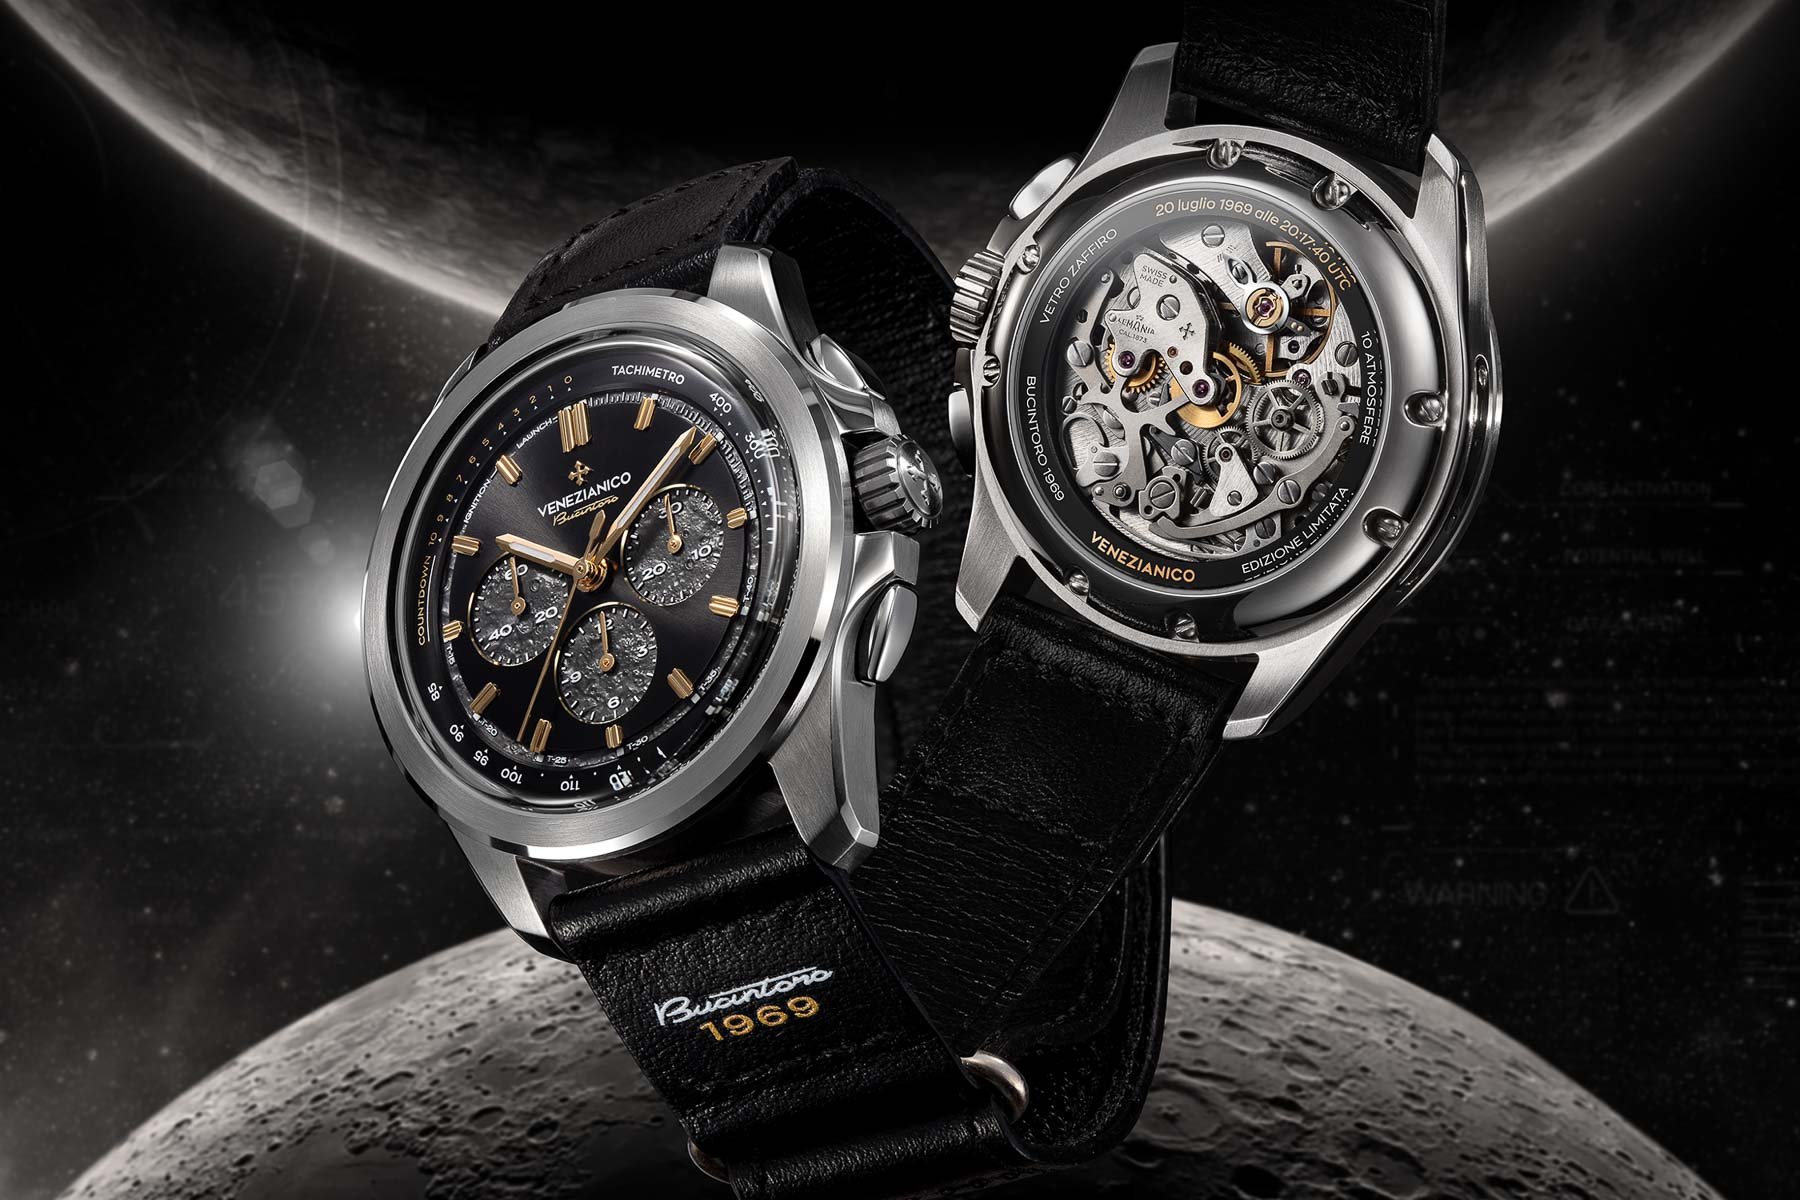 Ulysse Nardin Continues Its Freak Evolution With The Freak S Nomad